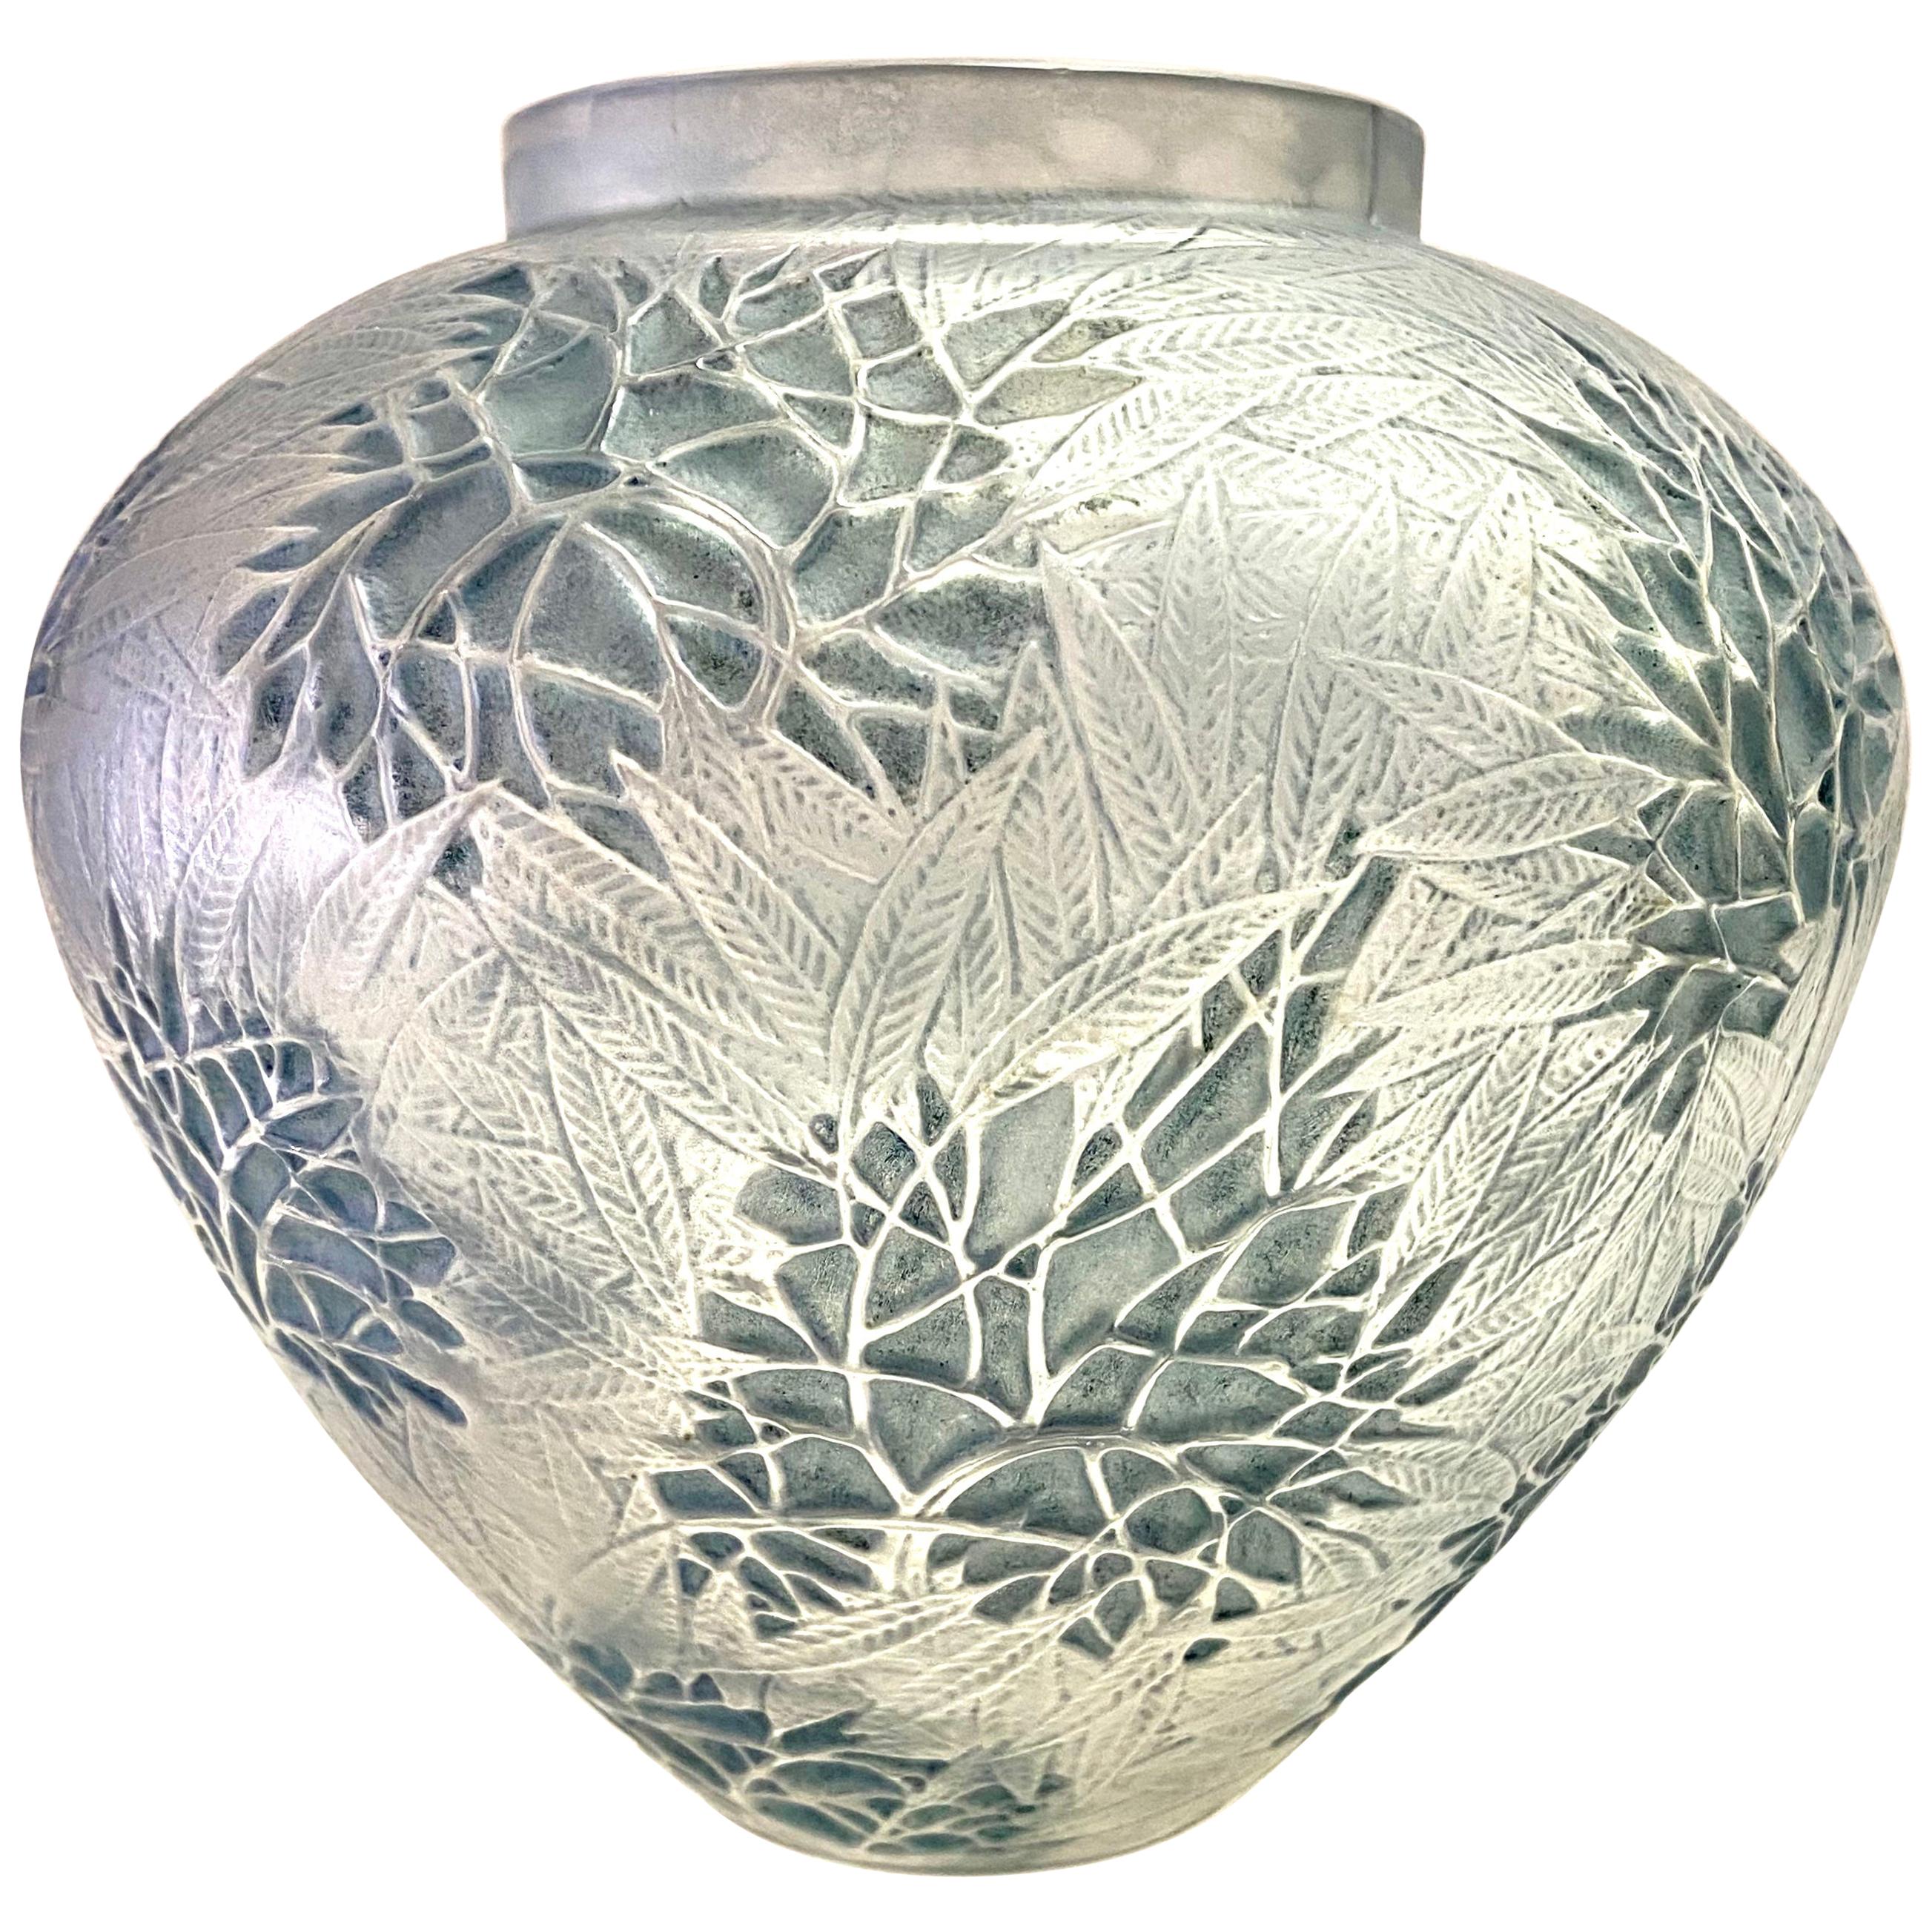 1923 René Lalique Esterel Vase in Frosted Glass with Blue-Grey Patina